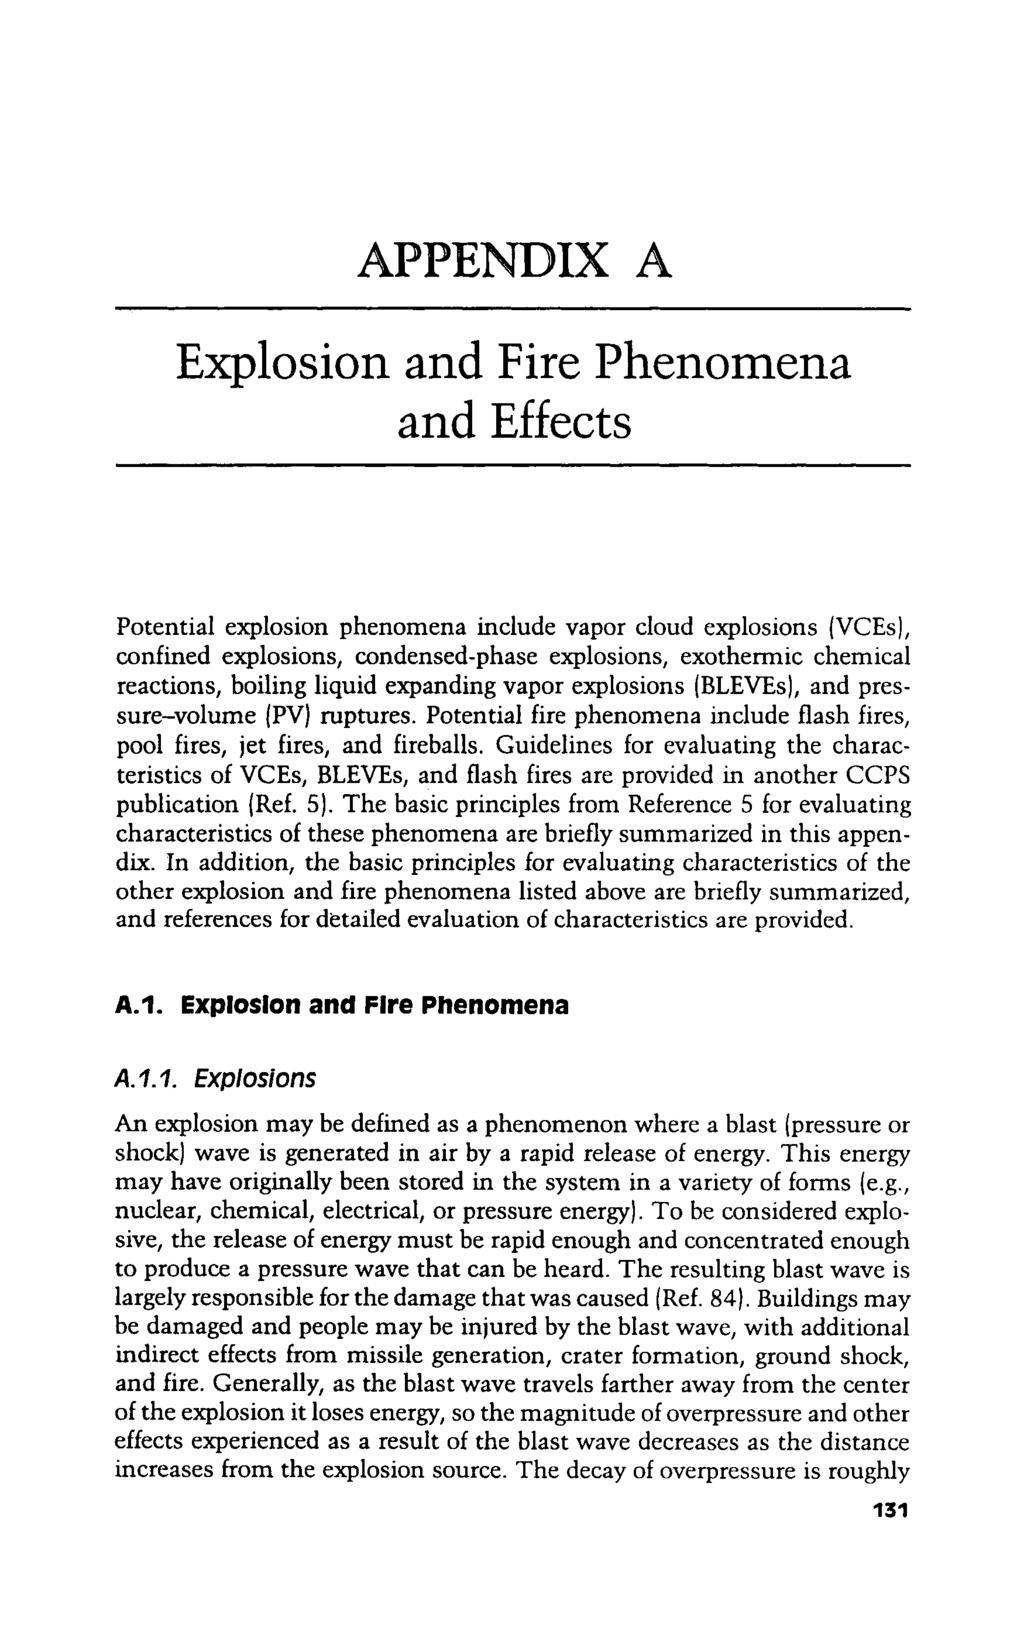 Guidelines for Evaluating Process Plant Buildings for External Explosions and Fires by Center for Chemical Process Safety Copyright 1996 American Institute of Chemical Engineers Explosion and Fire